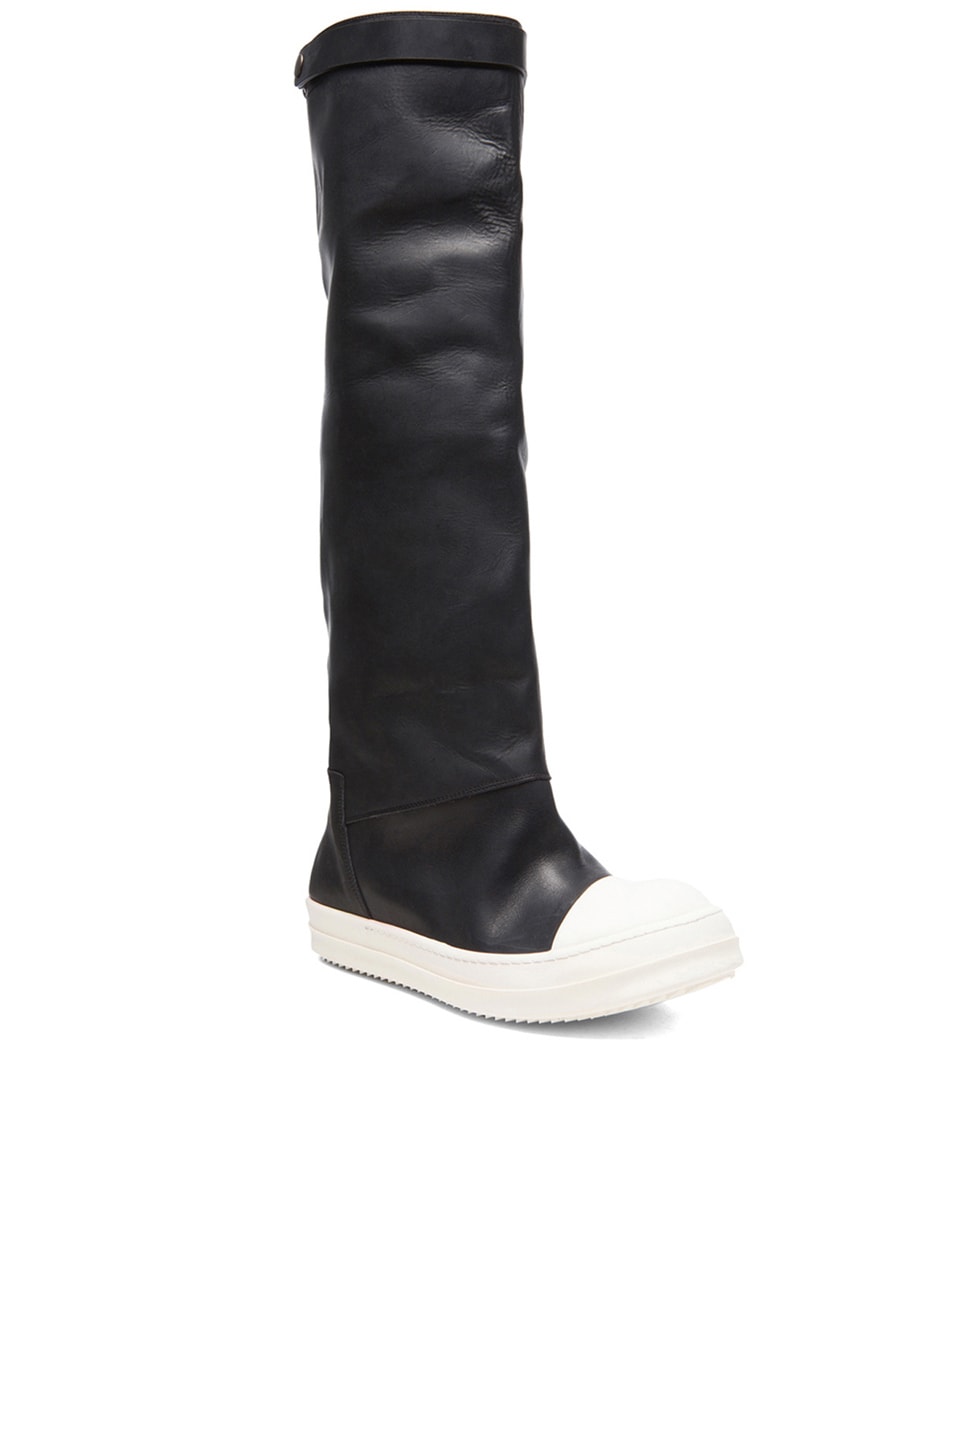 Image 1 of Rick Owens Elephant Leather Boots in Black & White